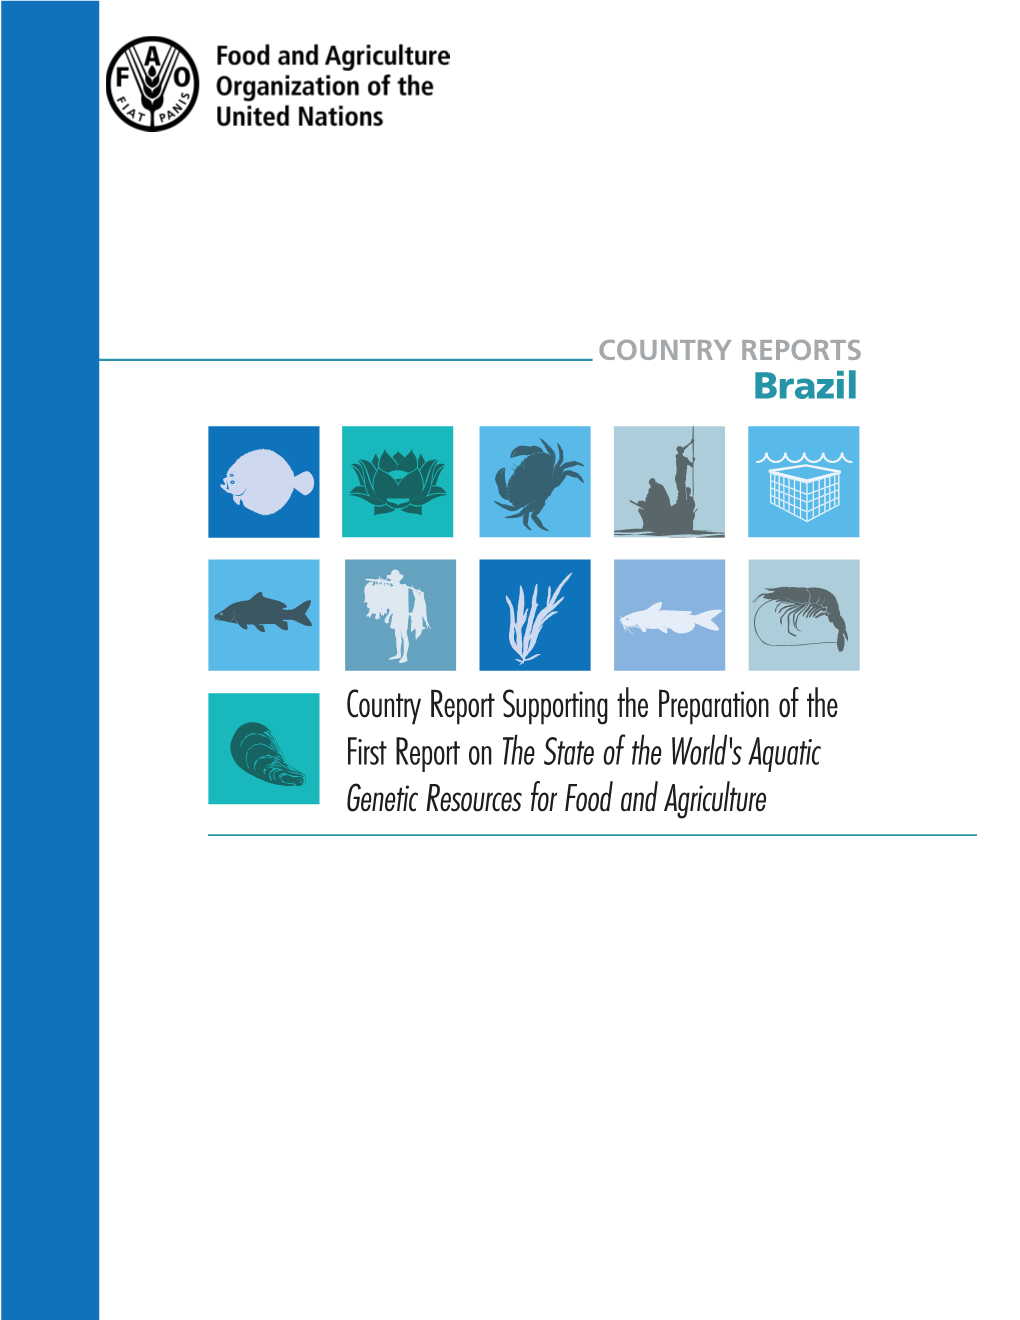 Country Report Supporting the Preparation of the First Report On